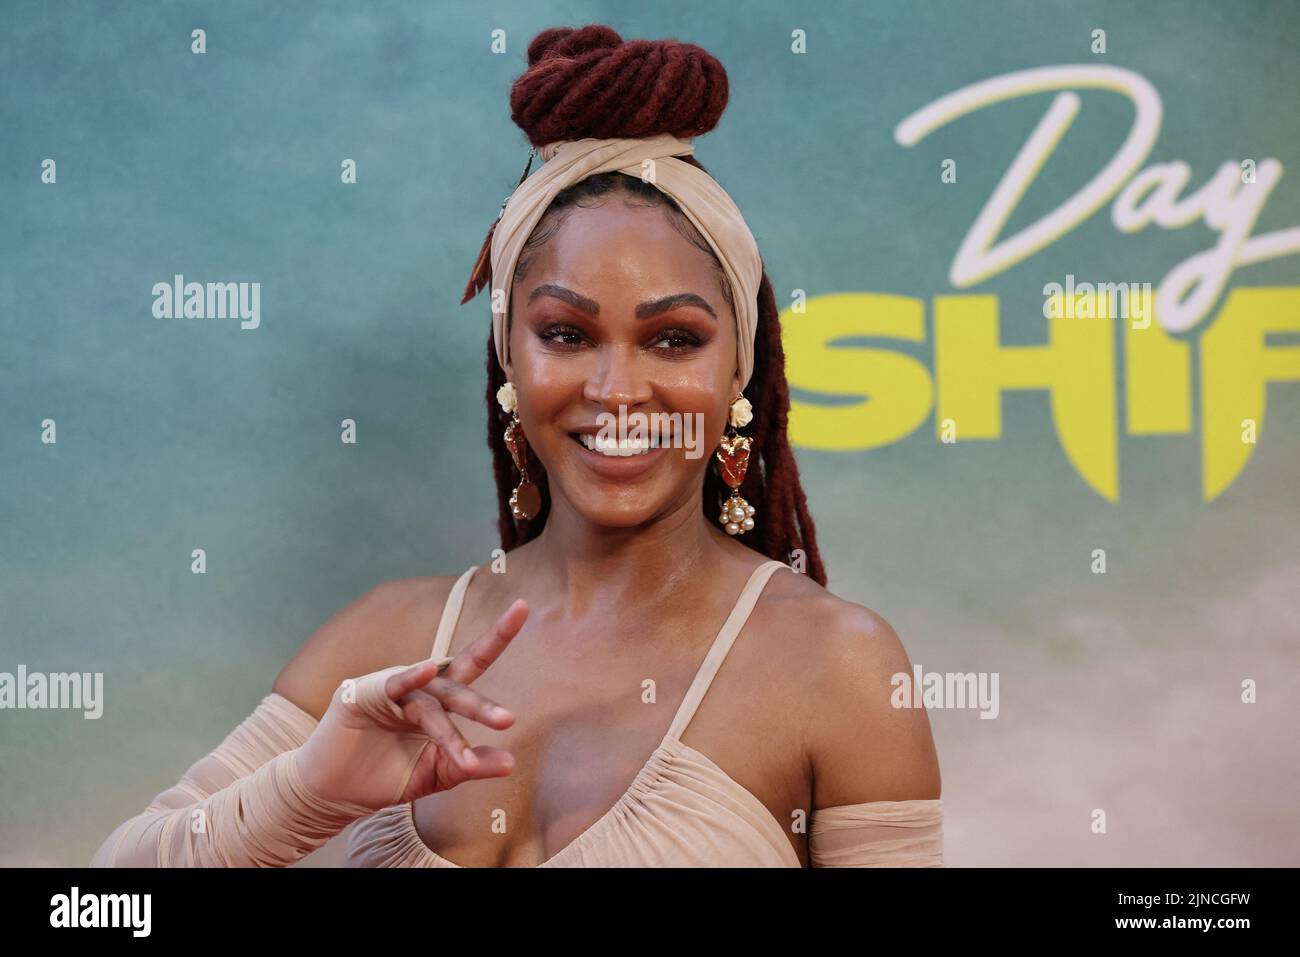 Cast member Meagan Good attends the premiere for the film Day Shift in Los Angeles, California, U.S., August 10, 2022. REUTERS/Mario Anzuoni Stock Photo